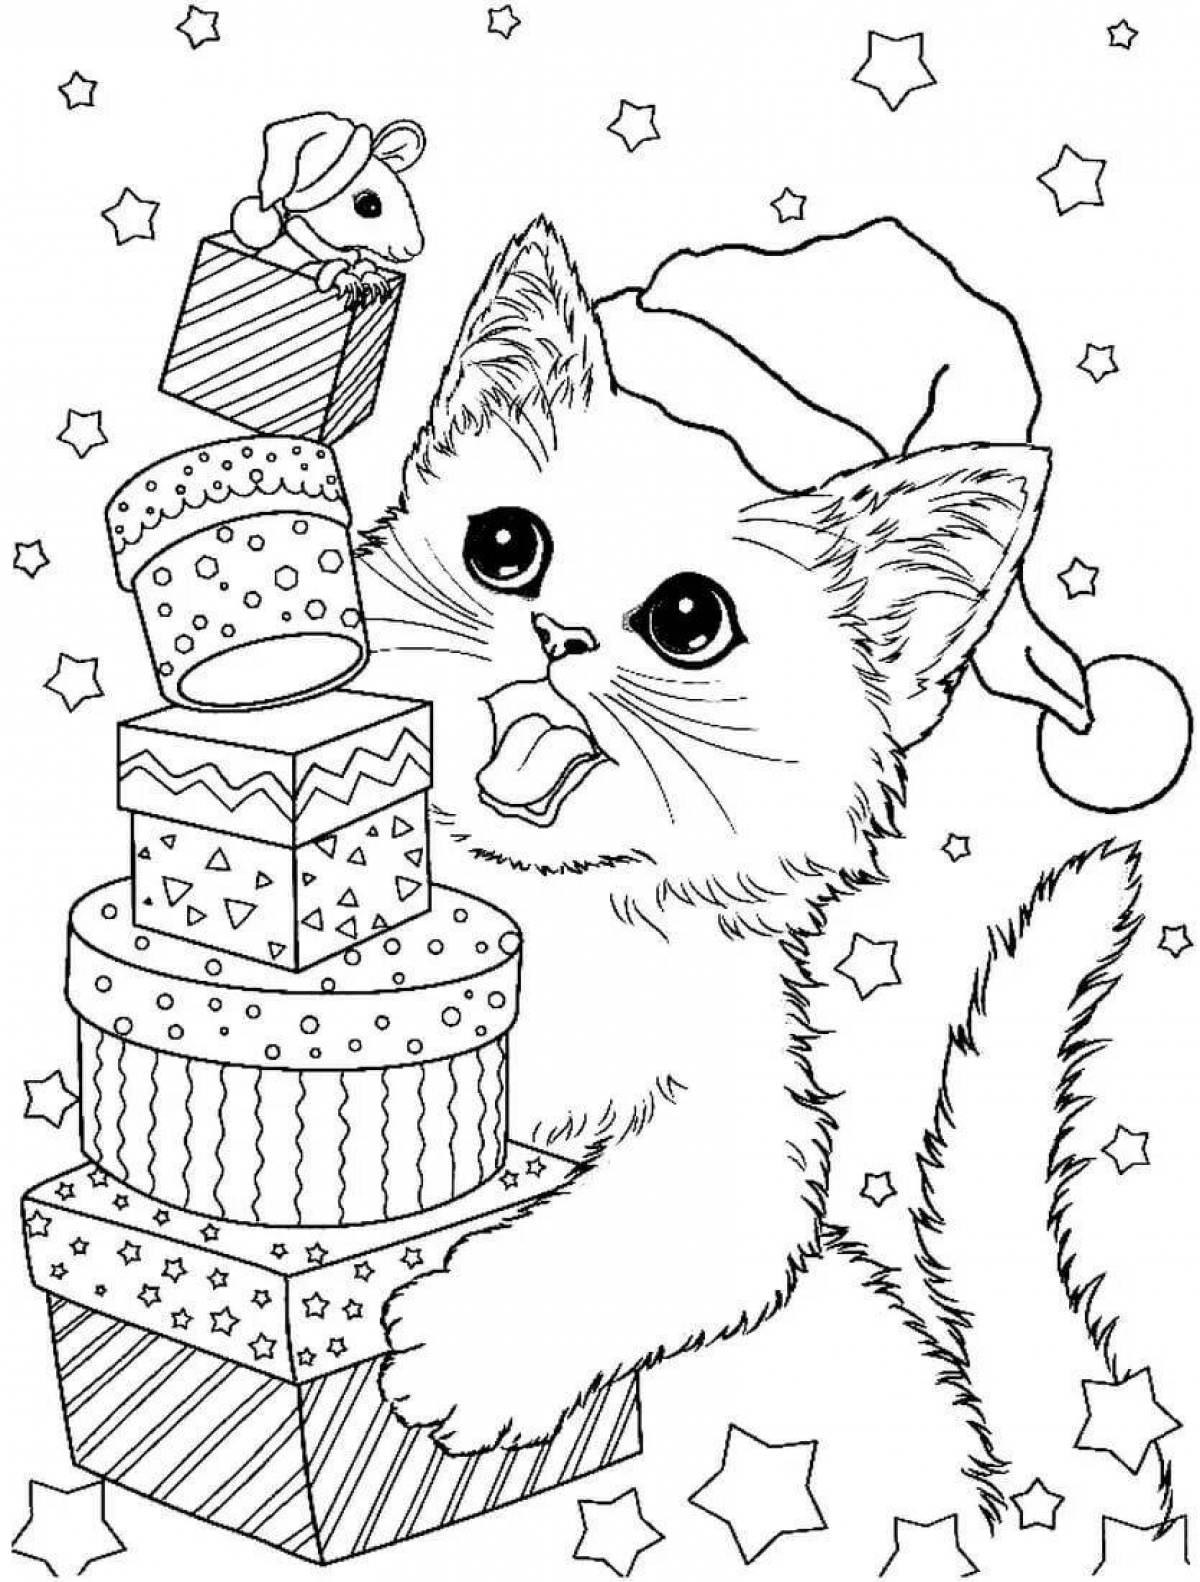 Brilliant year of the cat coloring book